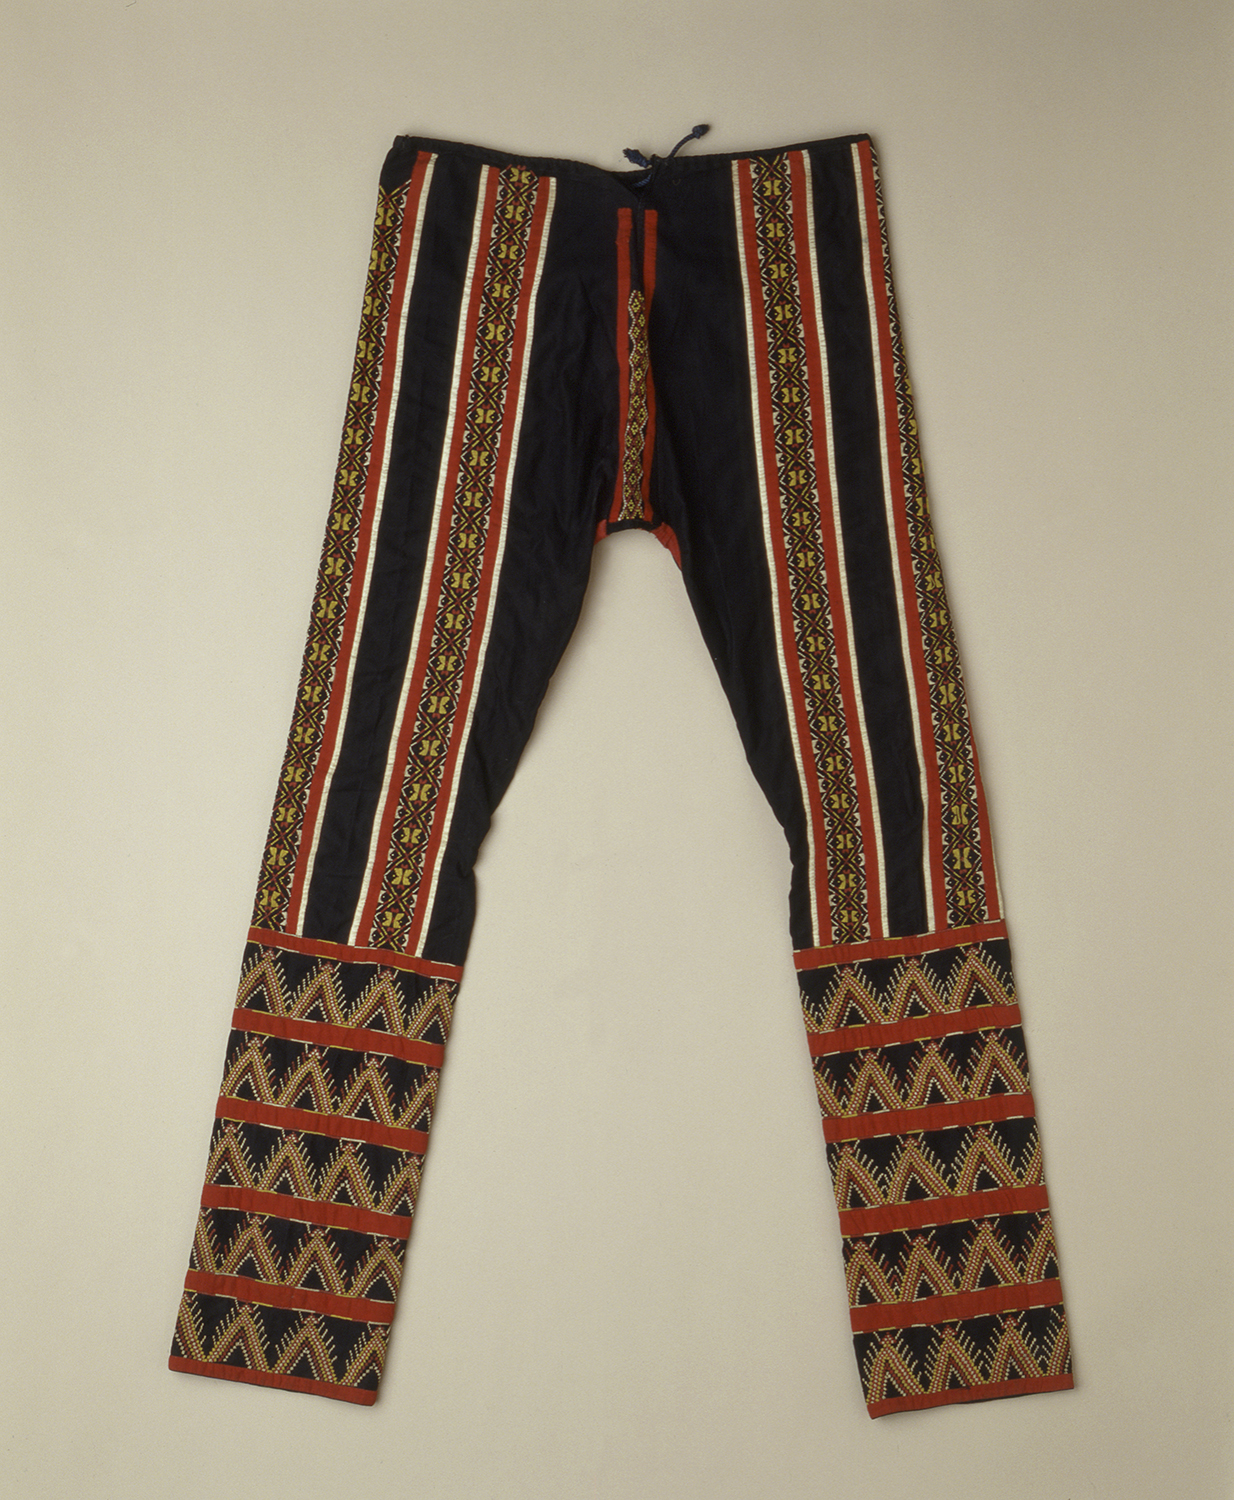 man's pants with applique and embroidery on cotton trade cloth.  Name recorded by collector Fay-Cooper Cole, saloal. 